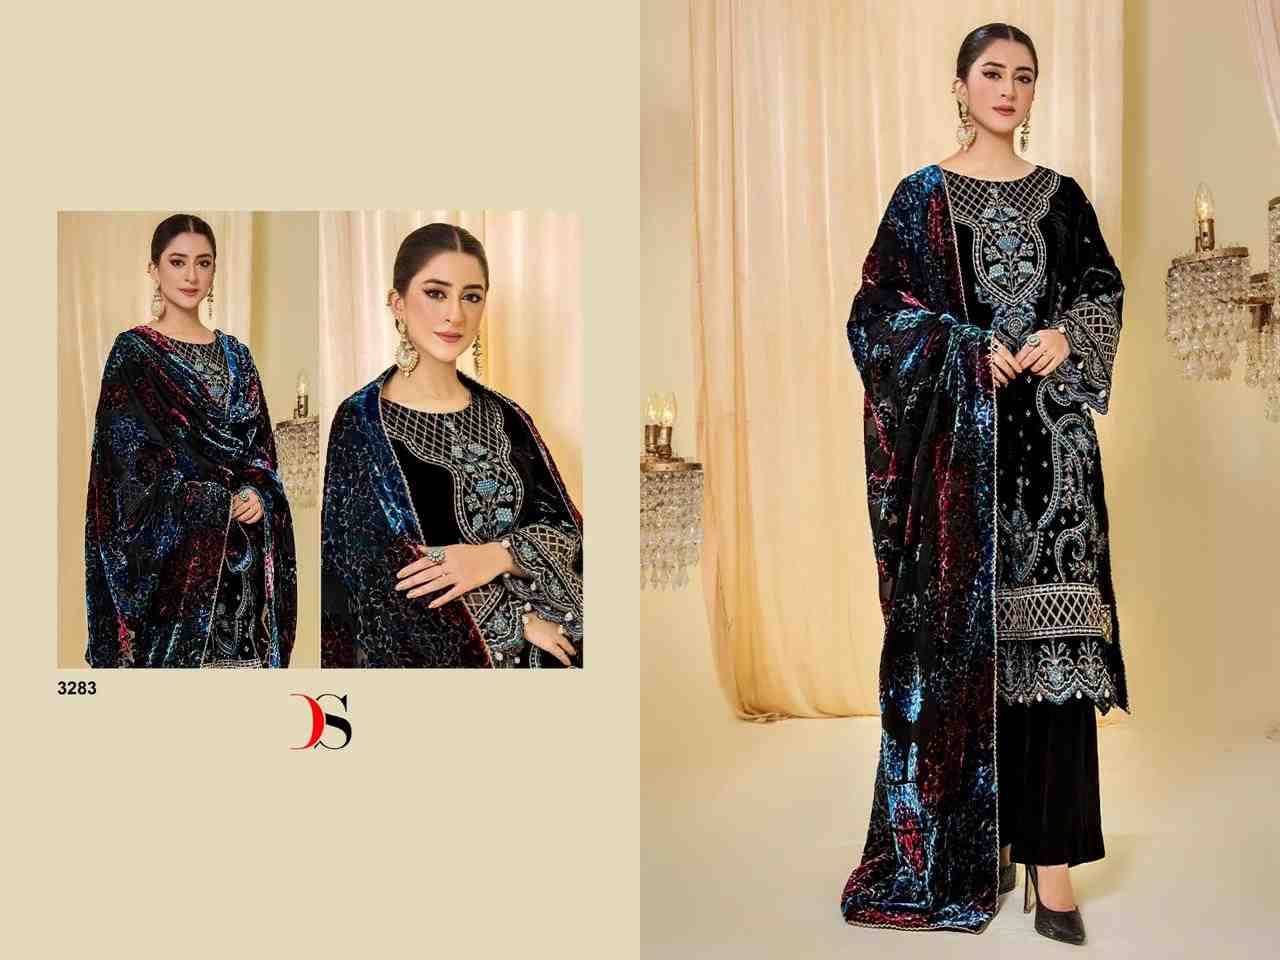 Sana Safinaz Velvet Collection By Deepsy Suits 3281 To 3286 Series Beautiful Pakistani Suits Stylish Fancy Colorful Party Wear & Occasional Wear Velvet With Embroidery Dresses At Wholesale Price